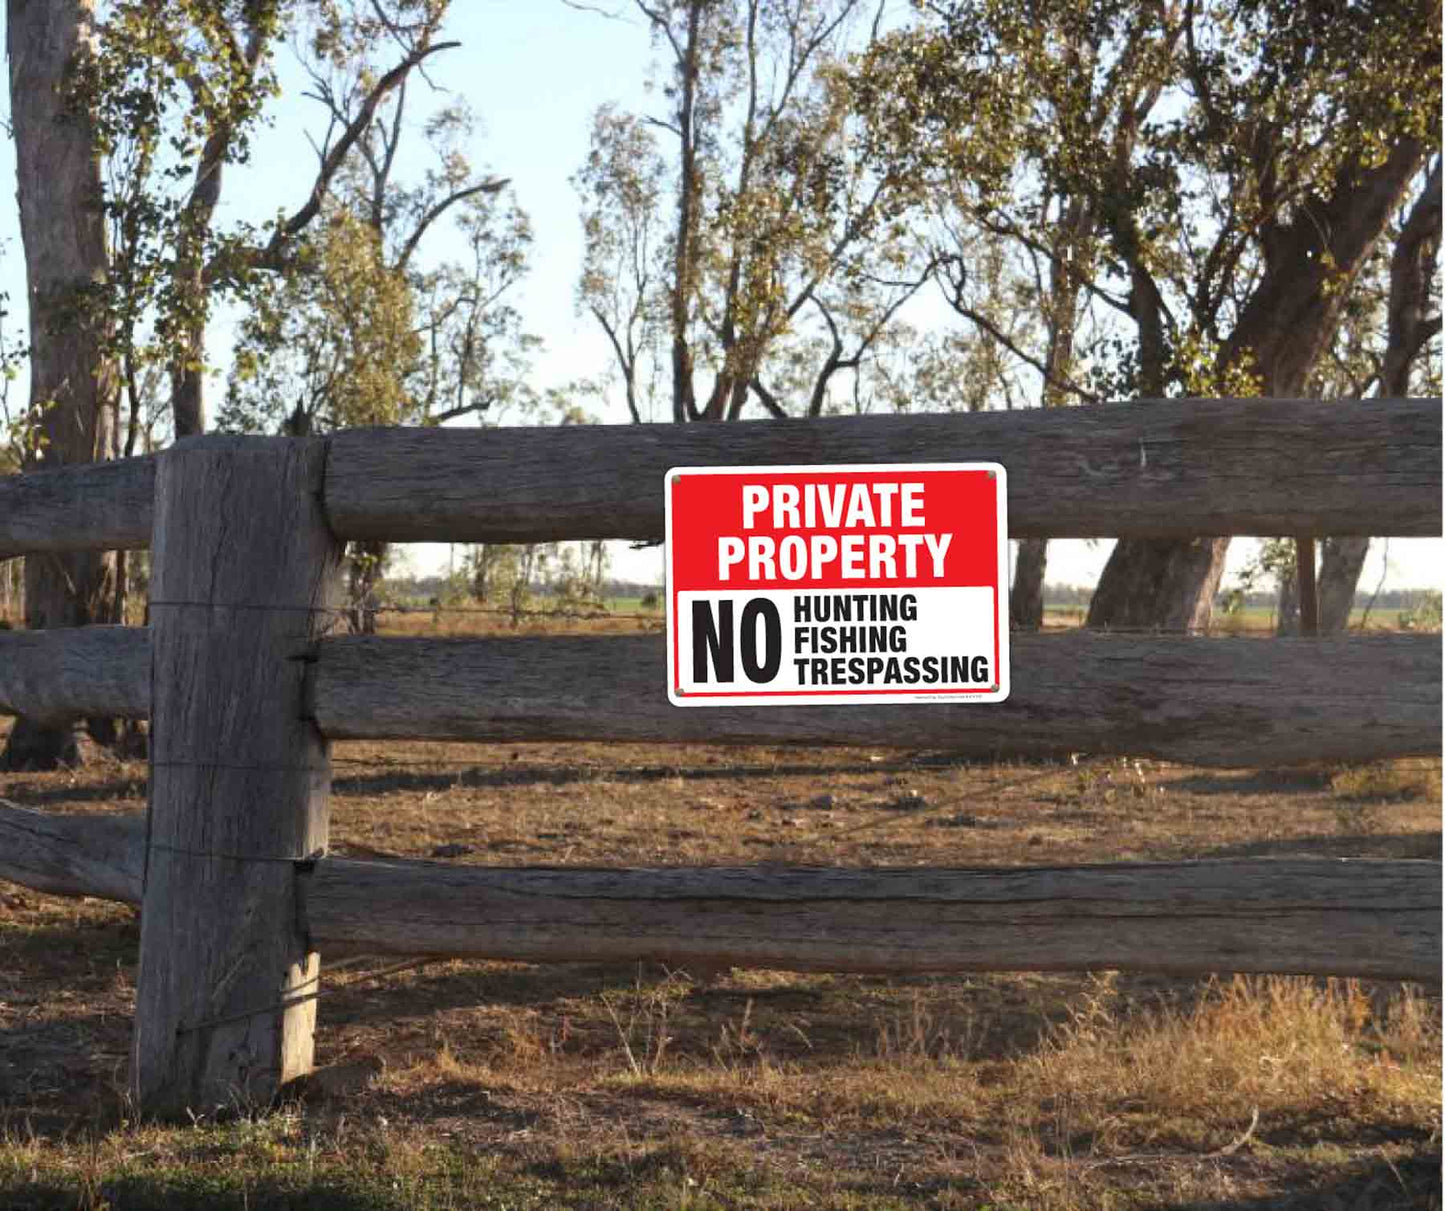 Private Property, No Hunting, No Fishing, No Trespassing aluminum sign and vinyl sticker signs installed on fence.